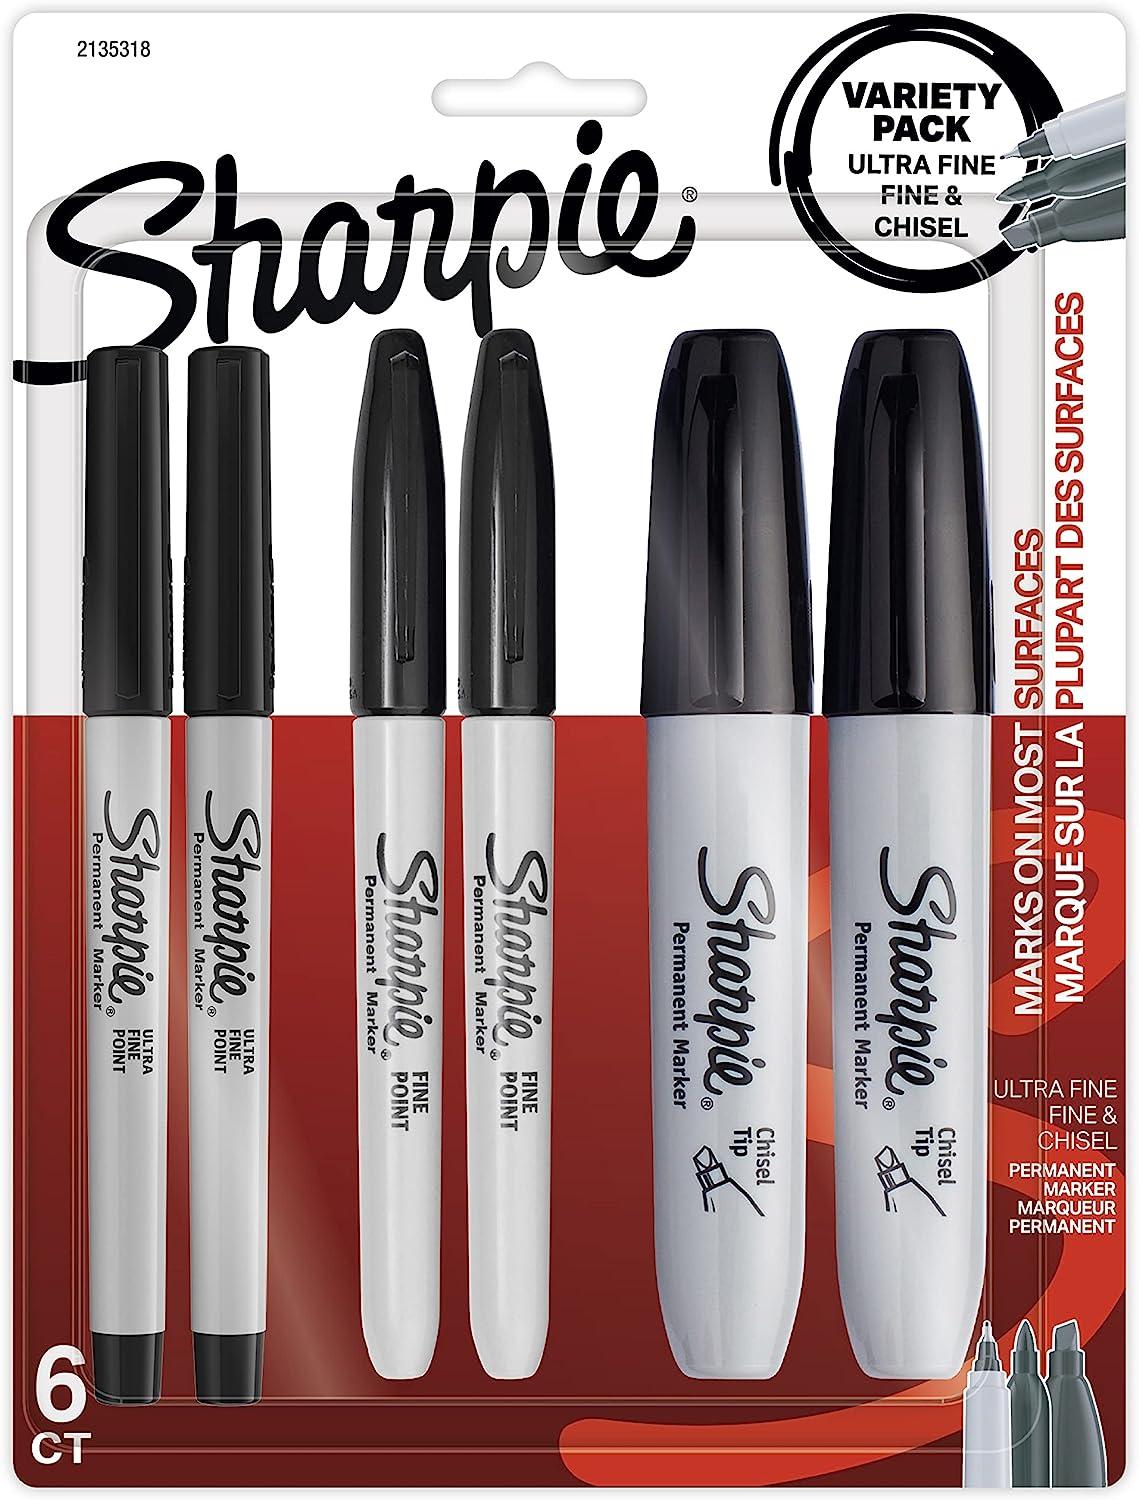 sharpie permanent markers variety pack featuring fine ultra-fine and chisel-point markers black 6 count 